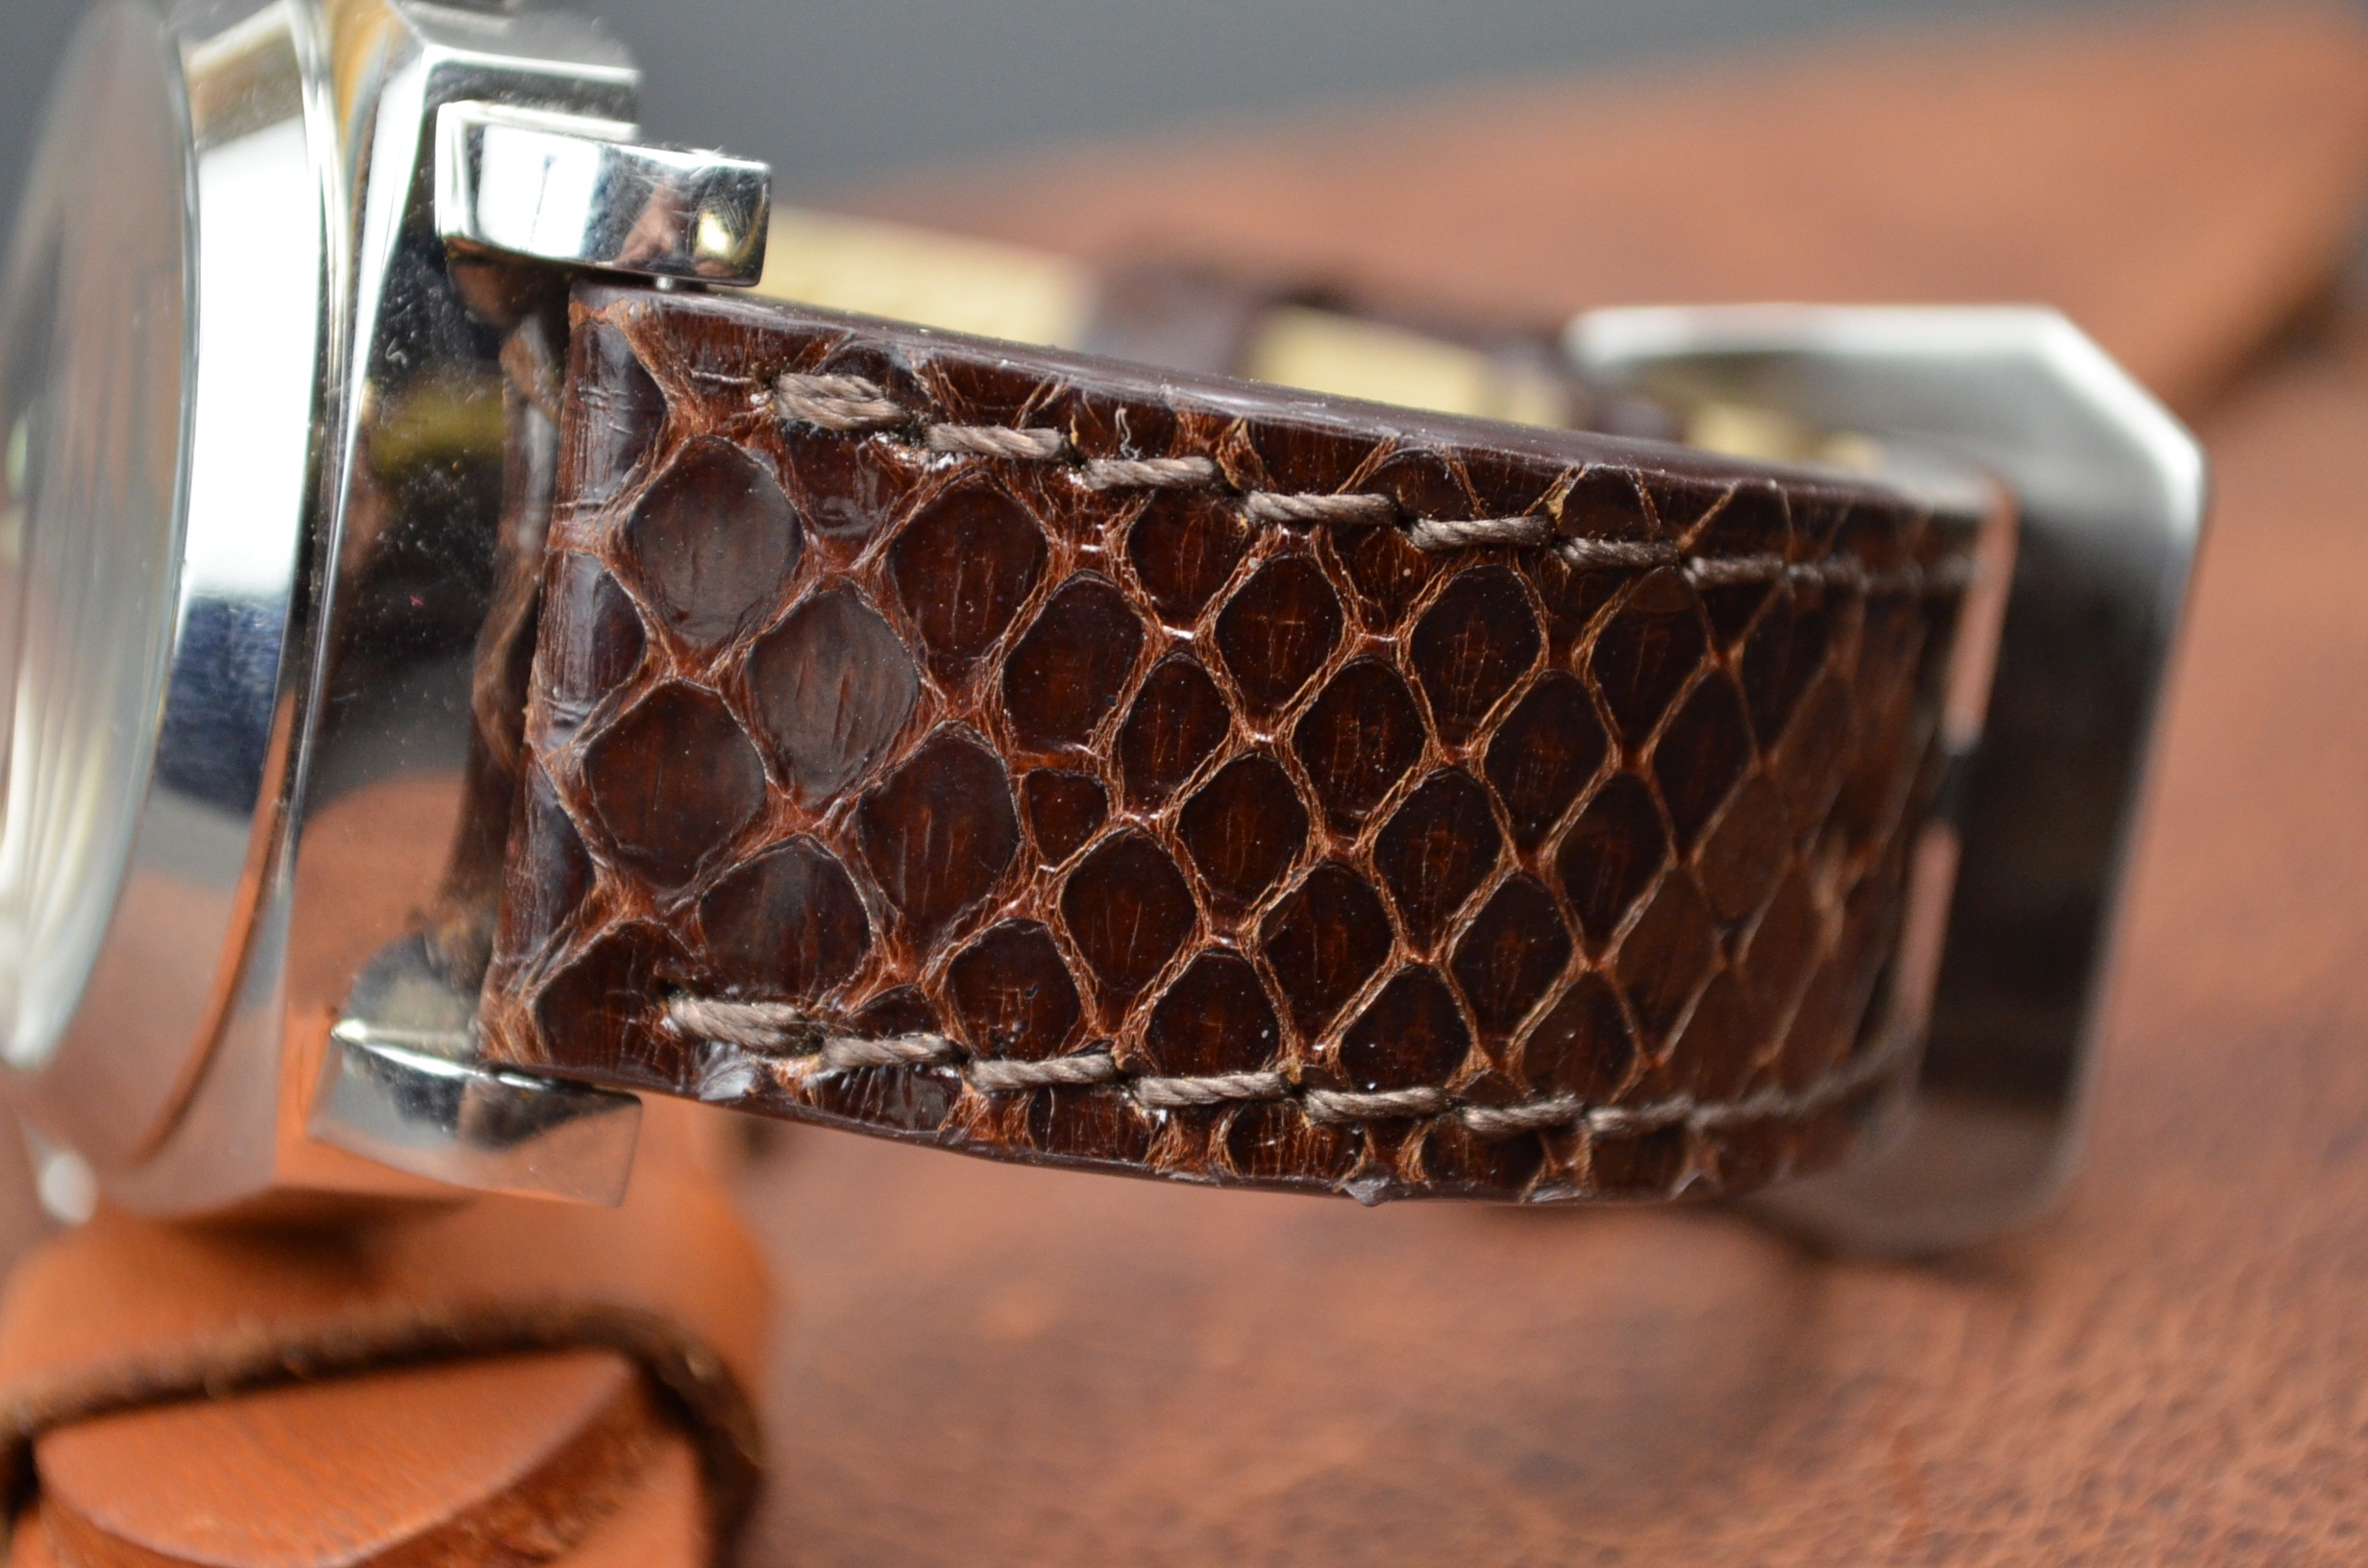 BROWN SHINY is one of our hand crafted watch straps. Available in brown color, 4 - 4.5 mm thick.